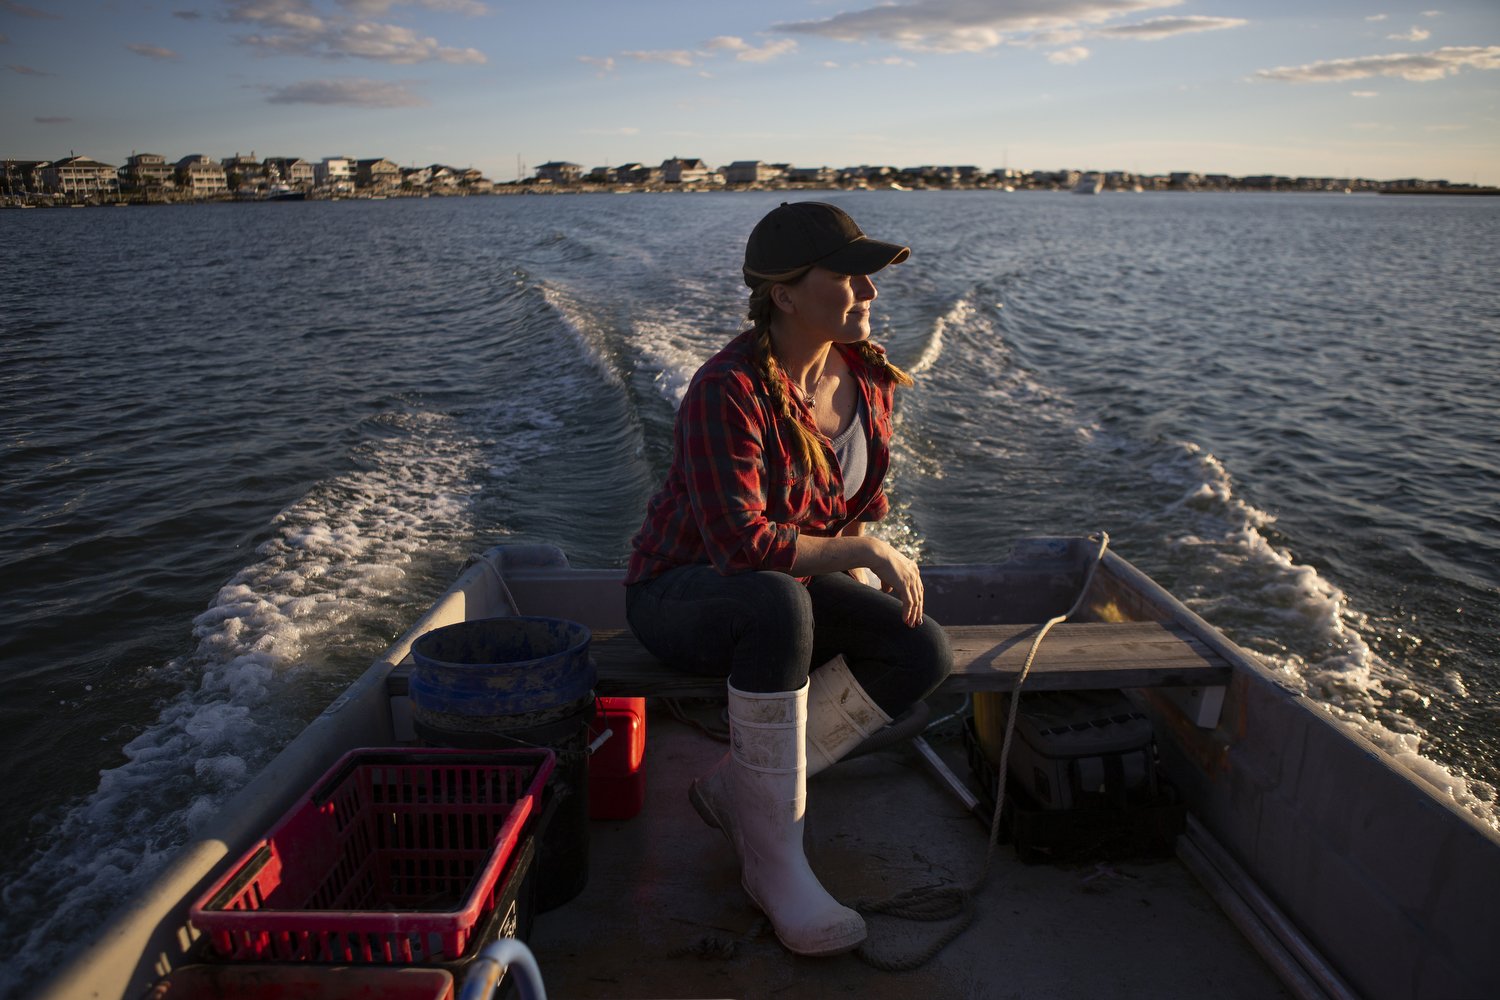  Ana Shellem, who owns Shell’em Seafood, navigates her boat through the waters near Wrightsville Beach, North Carolina.  For The New York Times 